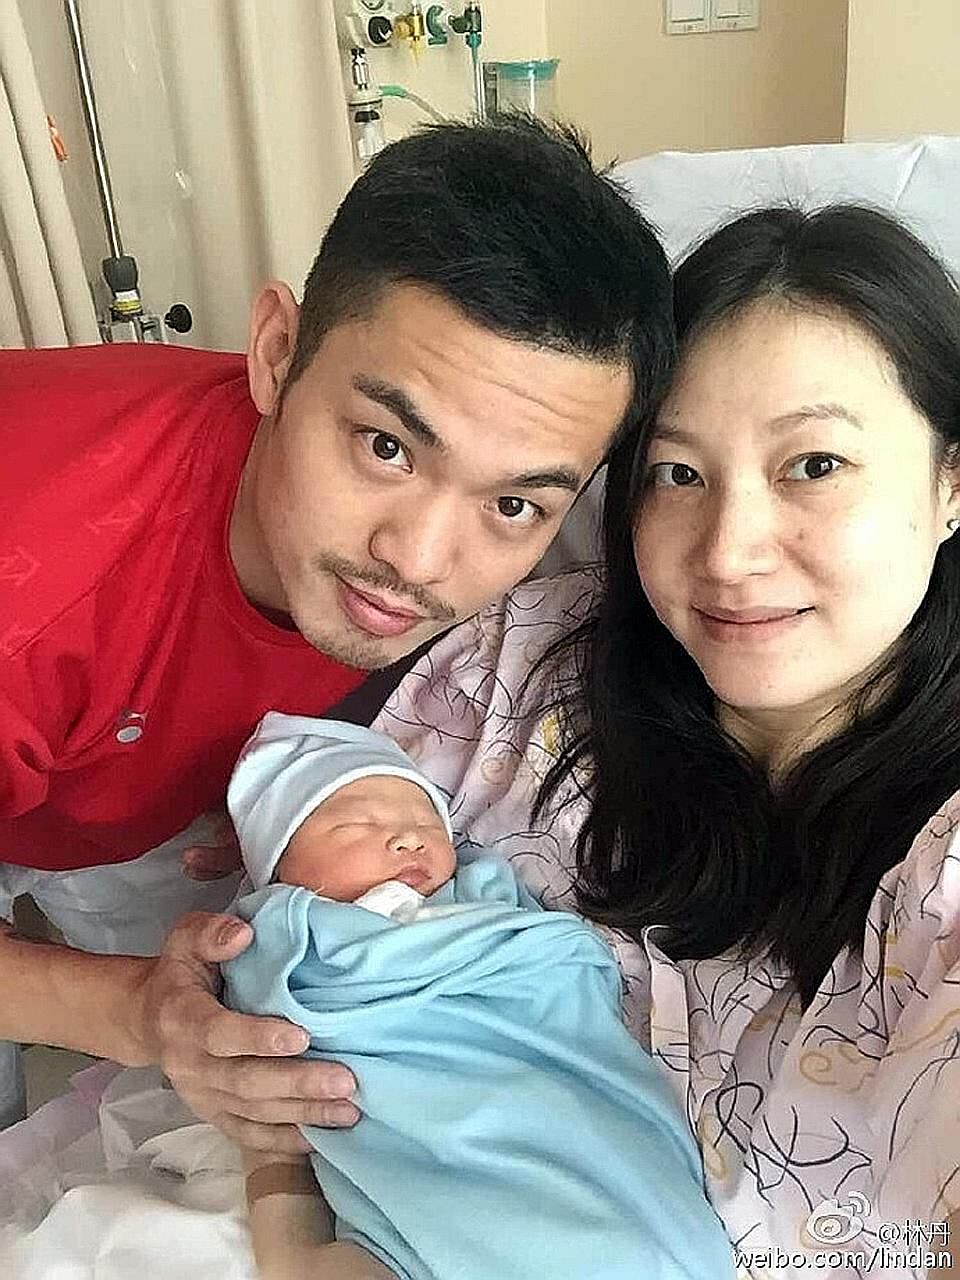 Above: Zhao Yaqi, a Chinese model and actress who was Miss Tourism of the Globe runner-up in 2009, was identified as the "mystery woman" in the intimate photos published on Weibo. Left: Lin Dan and Xie Xingfang with their son, who was born on Nov 5.